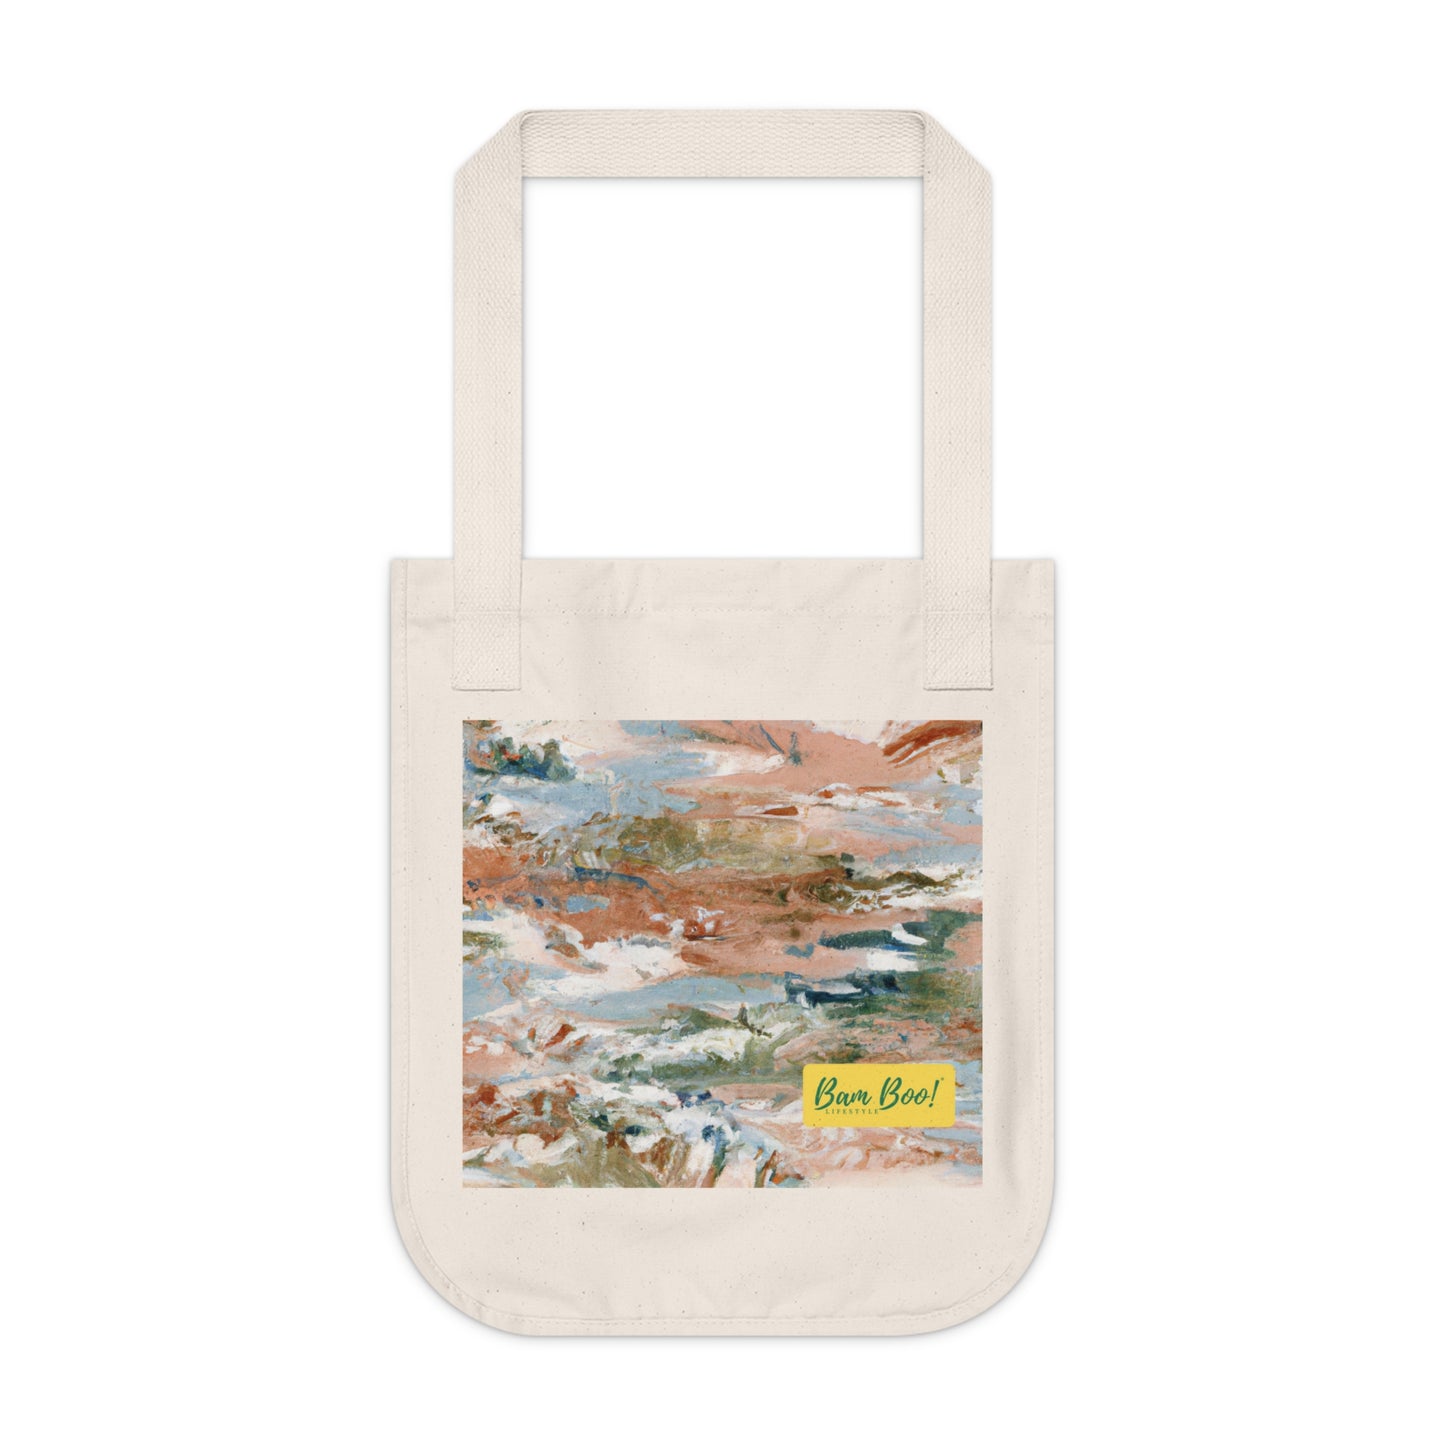 "Earth Art Explosion" - Bam Boo! Lifestyle Eco-friendly Tote Bag